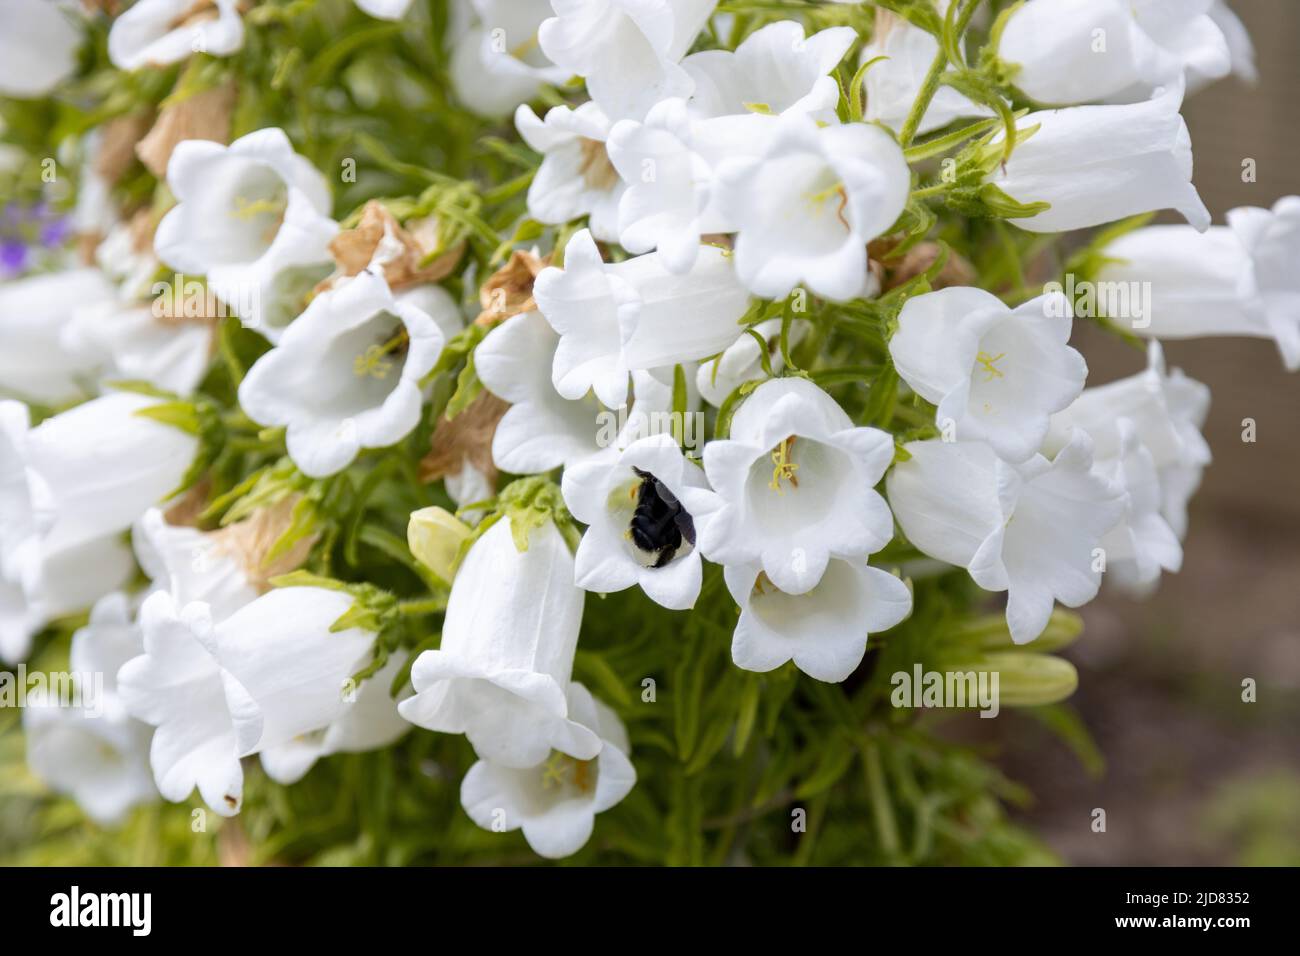 A big blue wood bee, Xylocopa violacea, searches for pollen in a bellflower Stock Photo